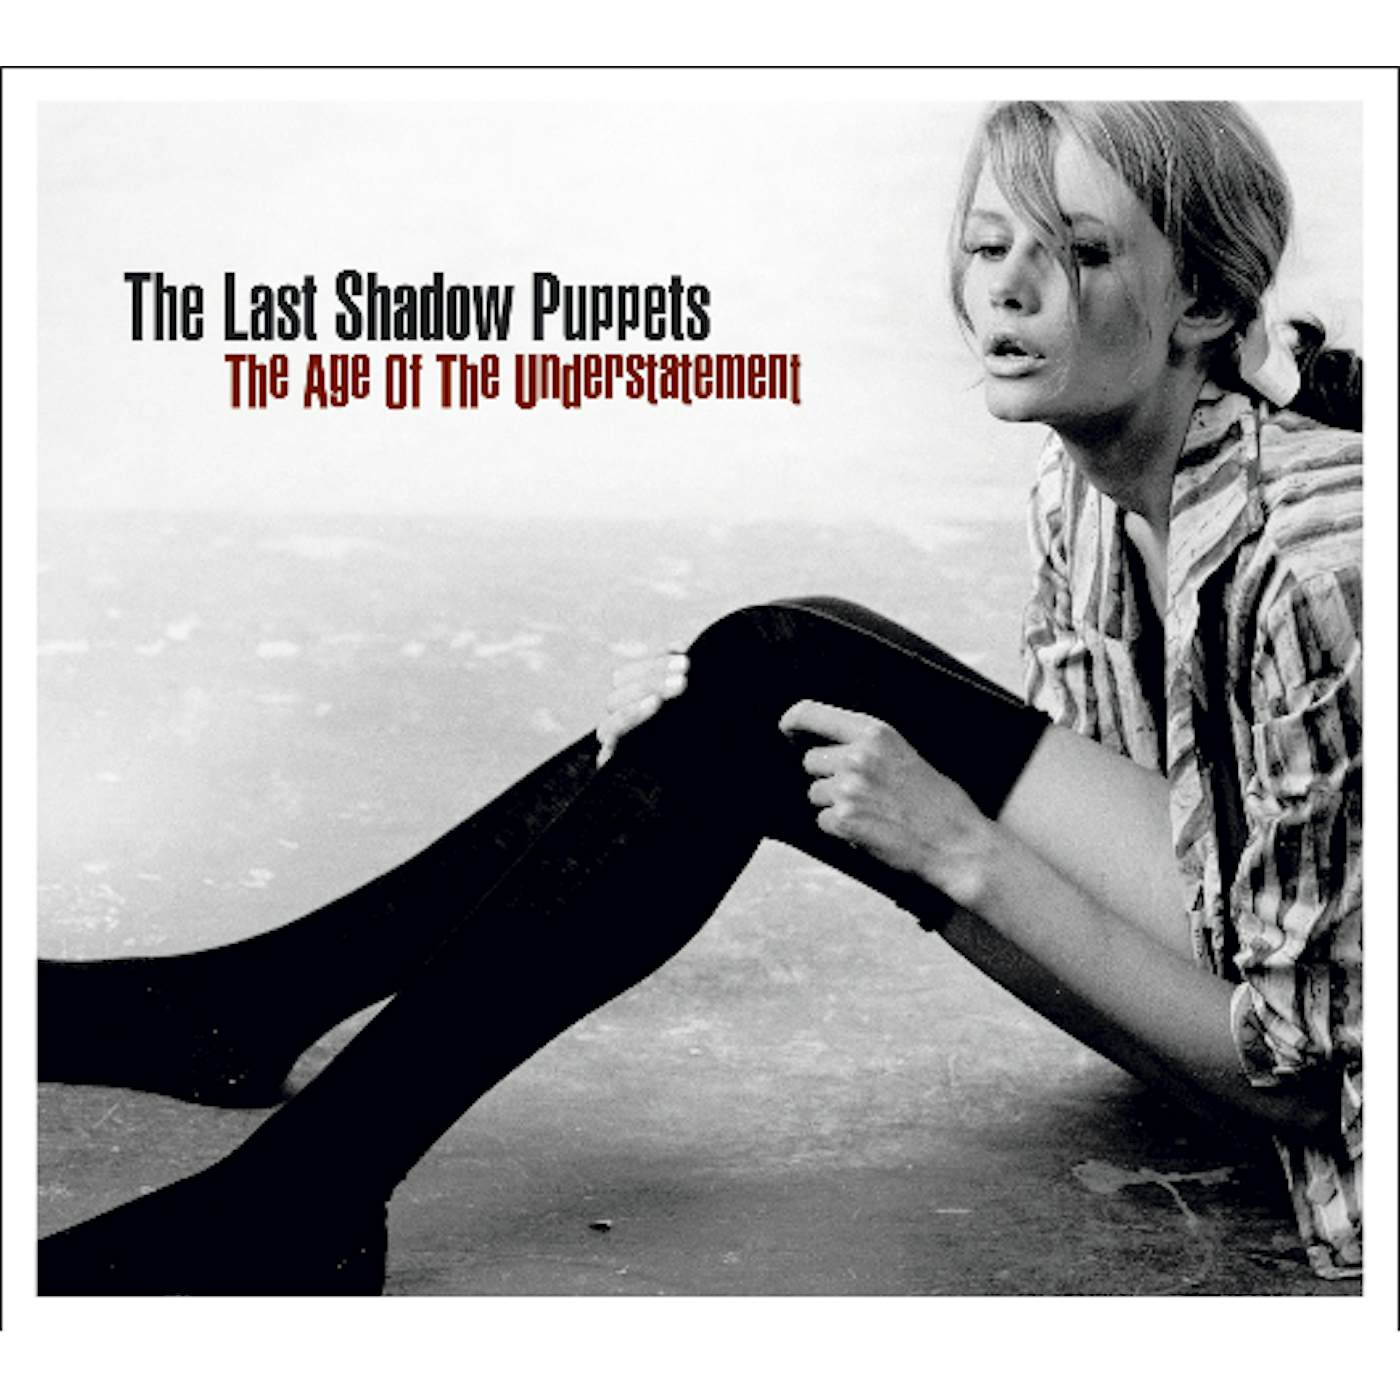 The Last Shadow Puppets AGE OF THE UNDERSTATEMENT CD